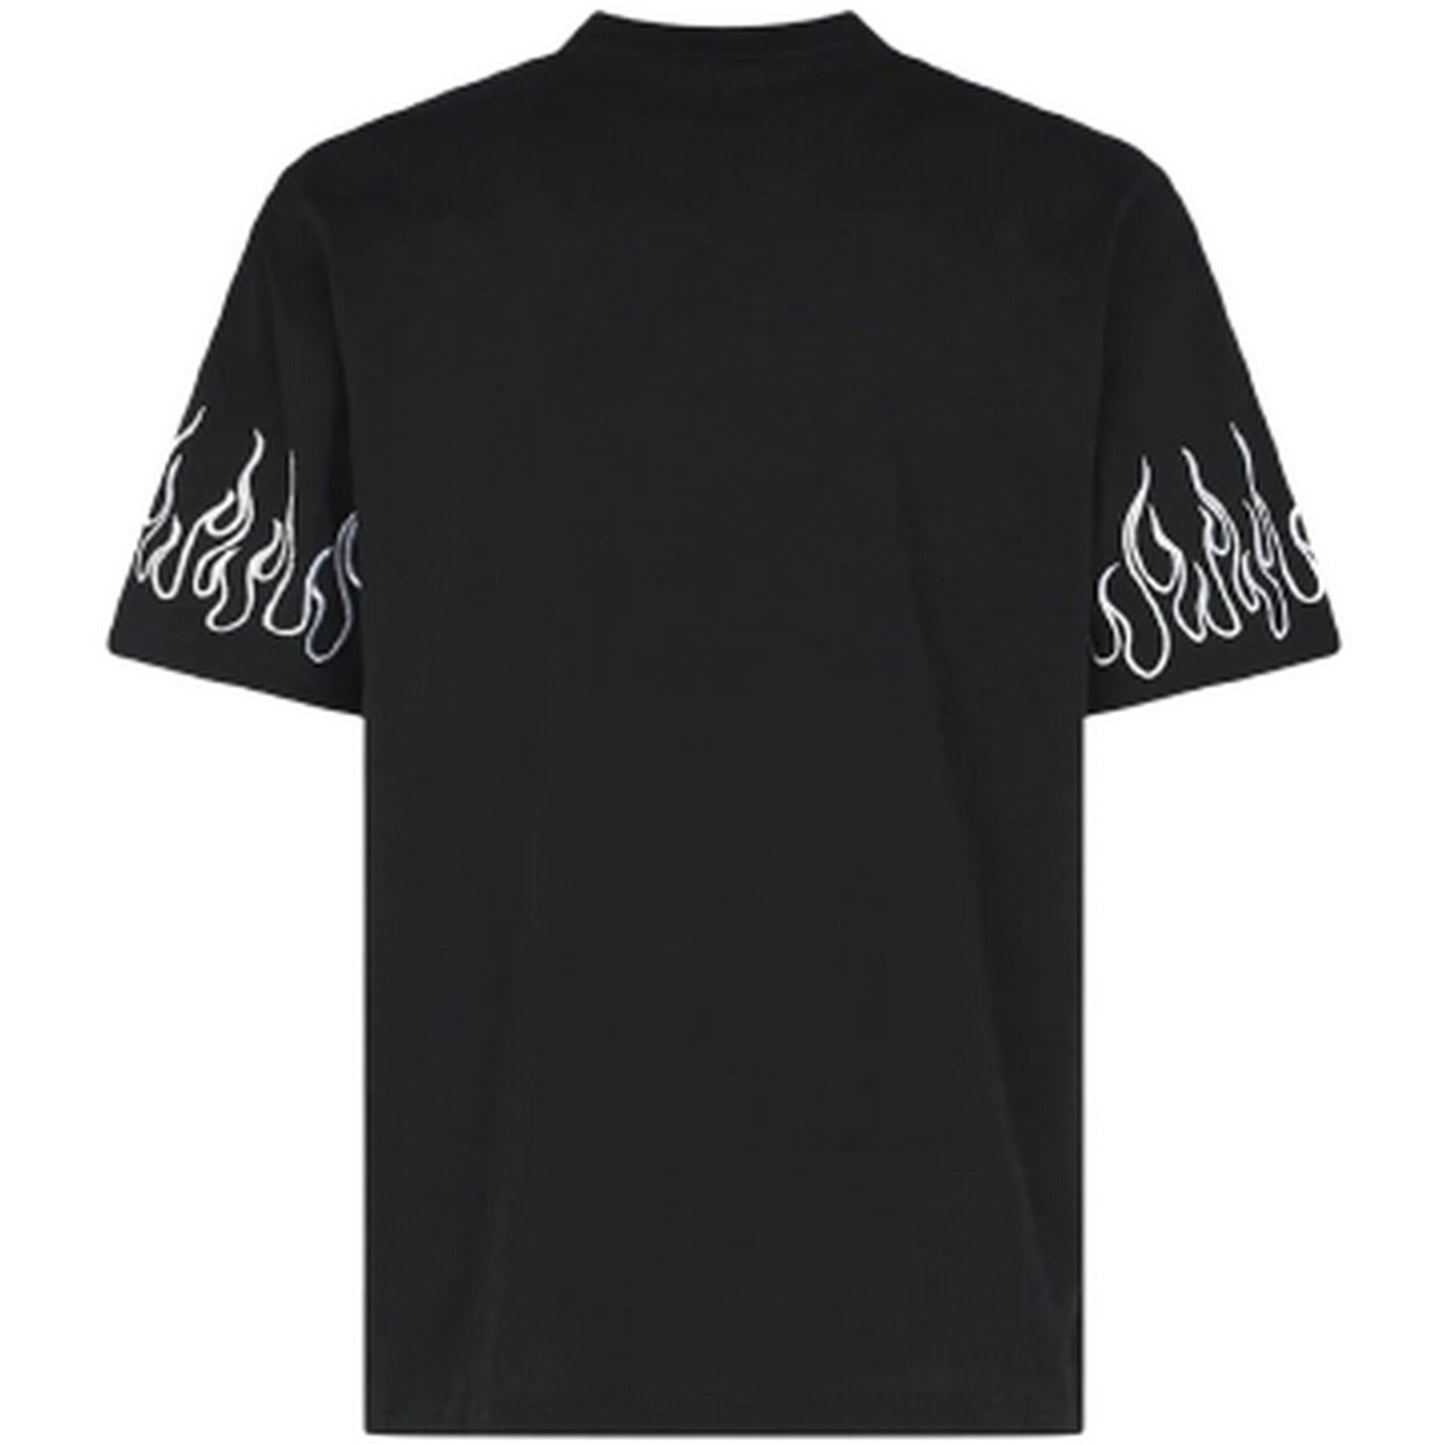 T-shirt Uomo Vision of Super - Black Tshirt With White Embroidered Flames - Nero